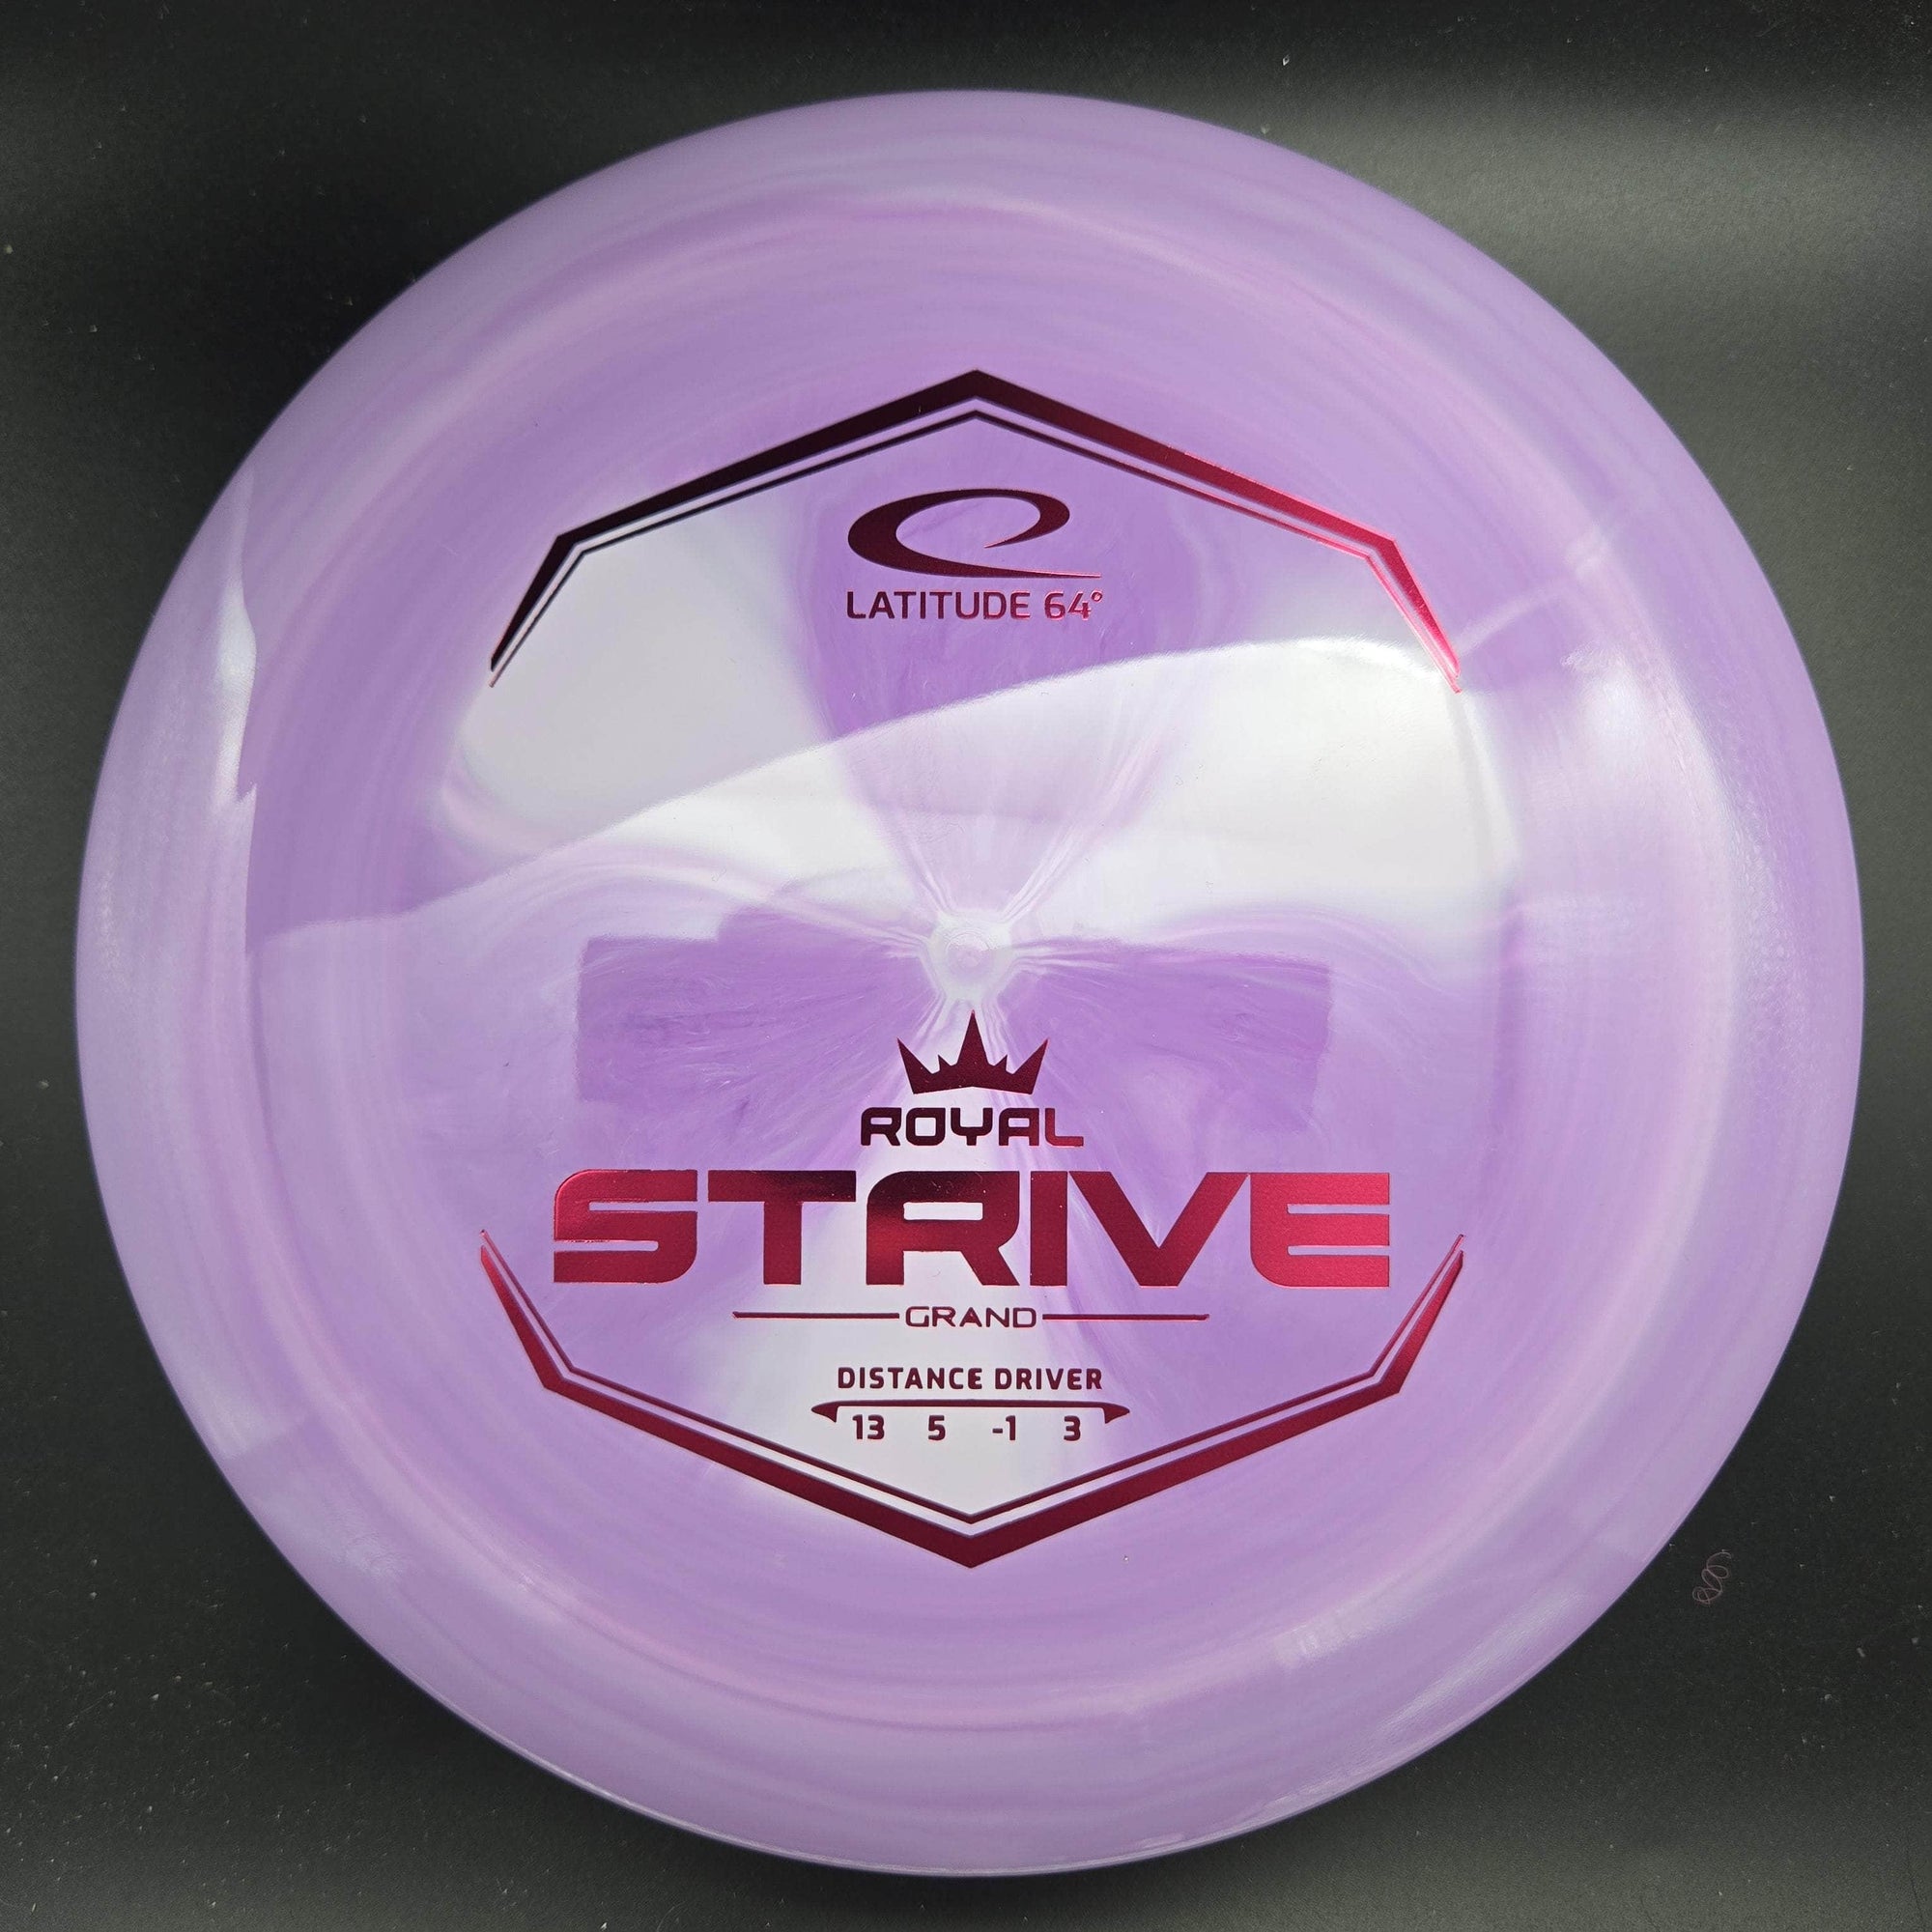 Latitude 64 Distance Driver Purple Pink/Red Stamp 173g Strive, Royal Grand